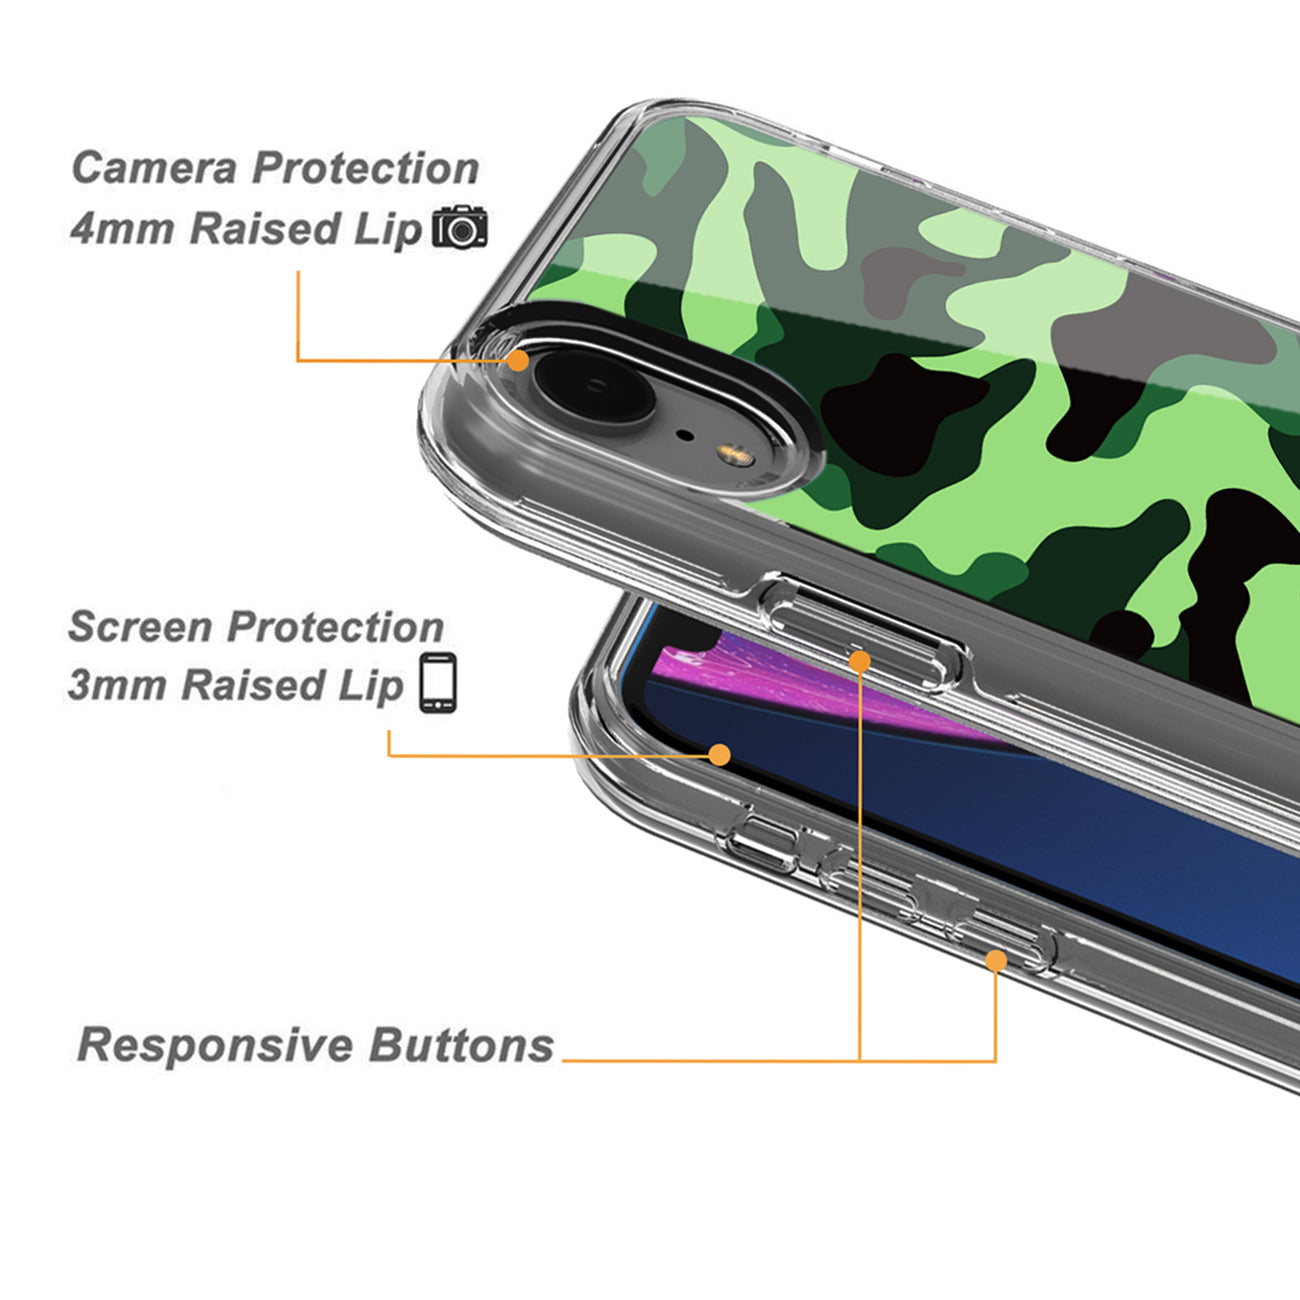 Camouflage Dual Layer Hybrid Hard & Soft TPU Rubber Case for IPH XR In Mint Green